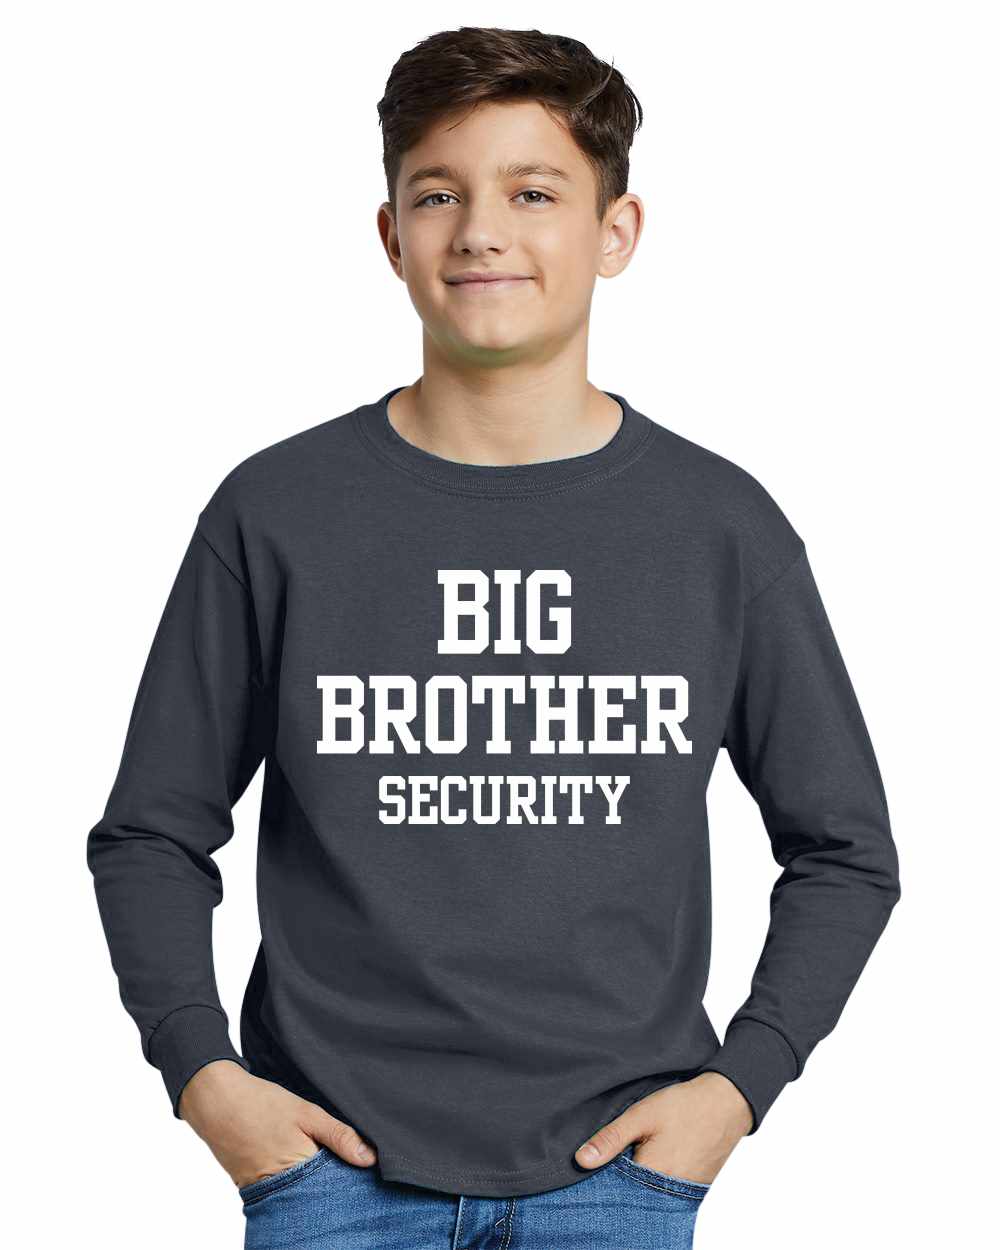 Big Brother Security on Youth Long Sleeve Shirt (#1136-203)